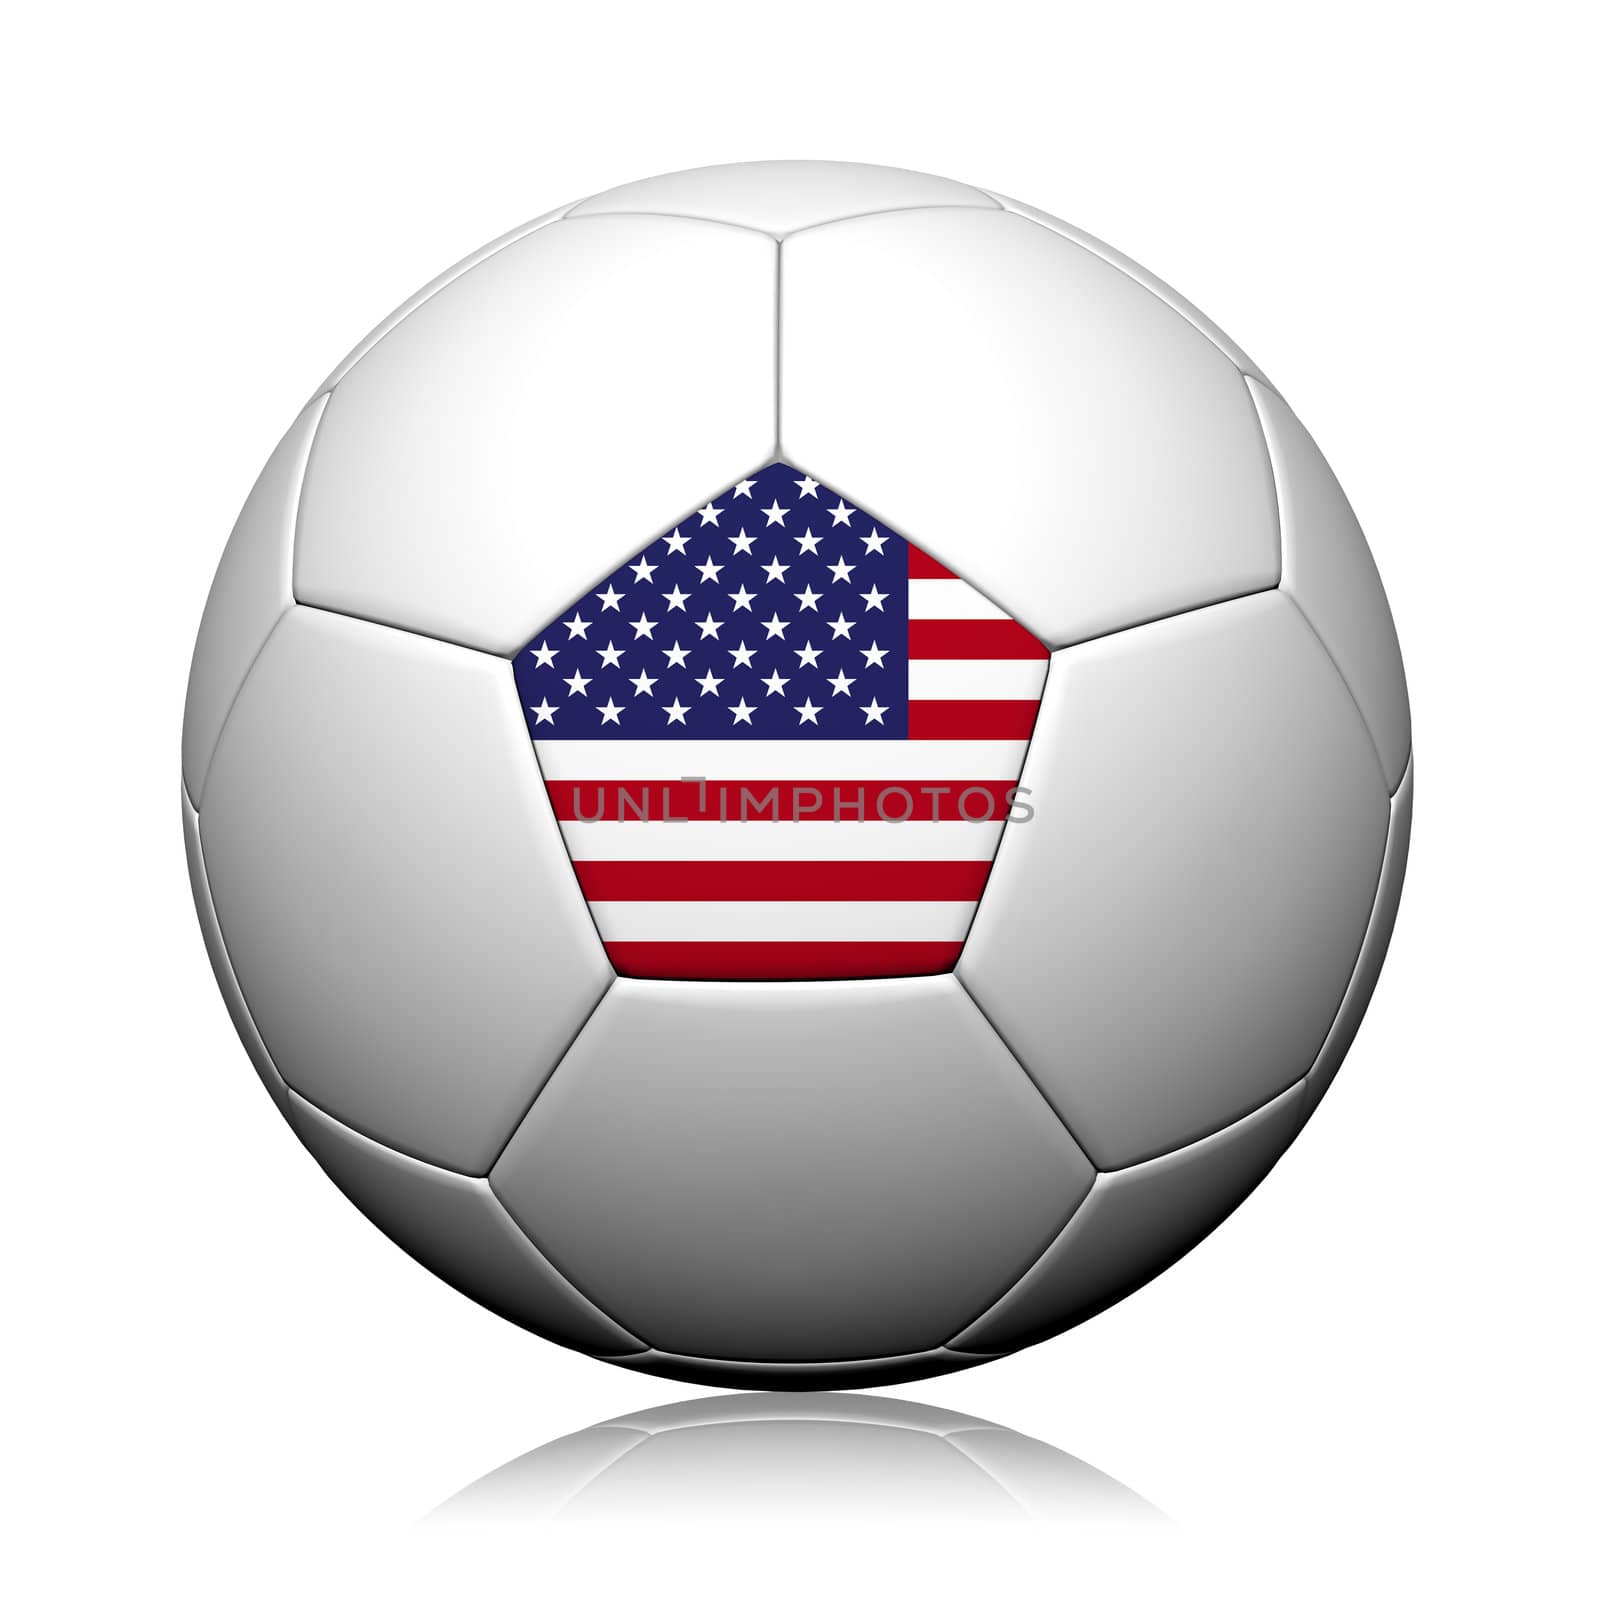 The United States Flag Pattern 3d rendering of a soccer ball by jakgree